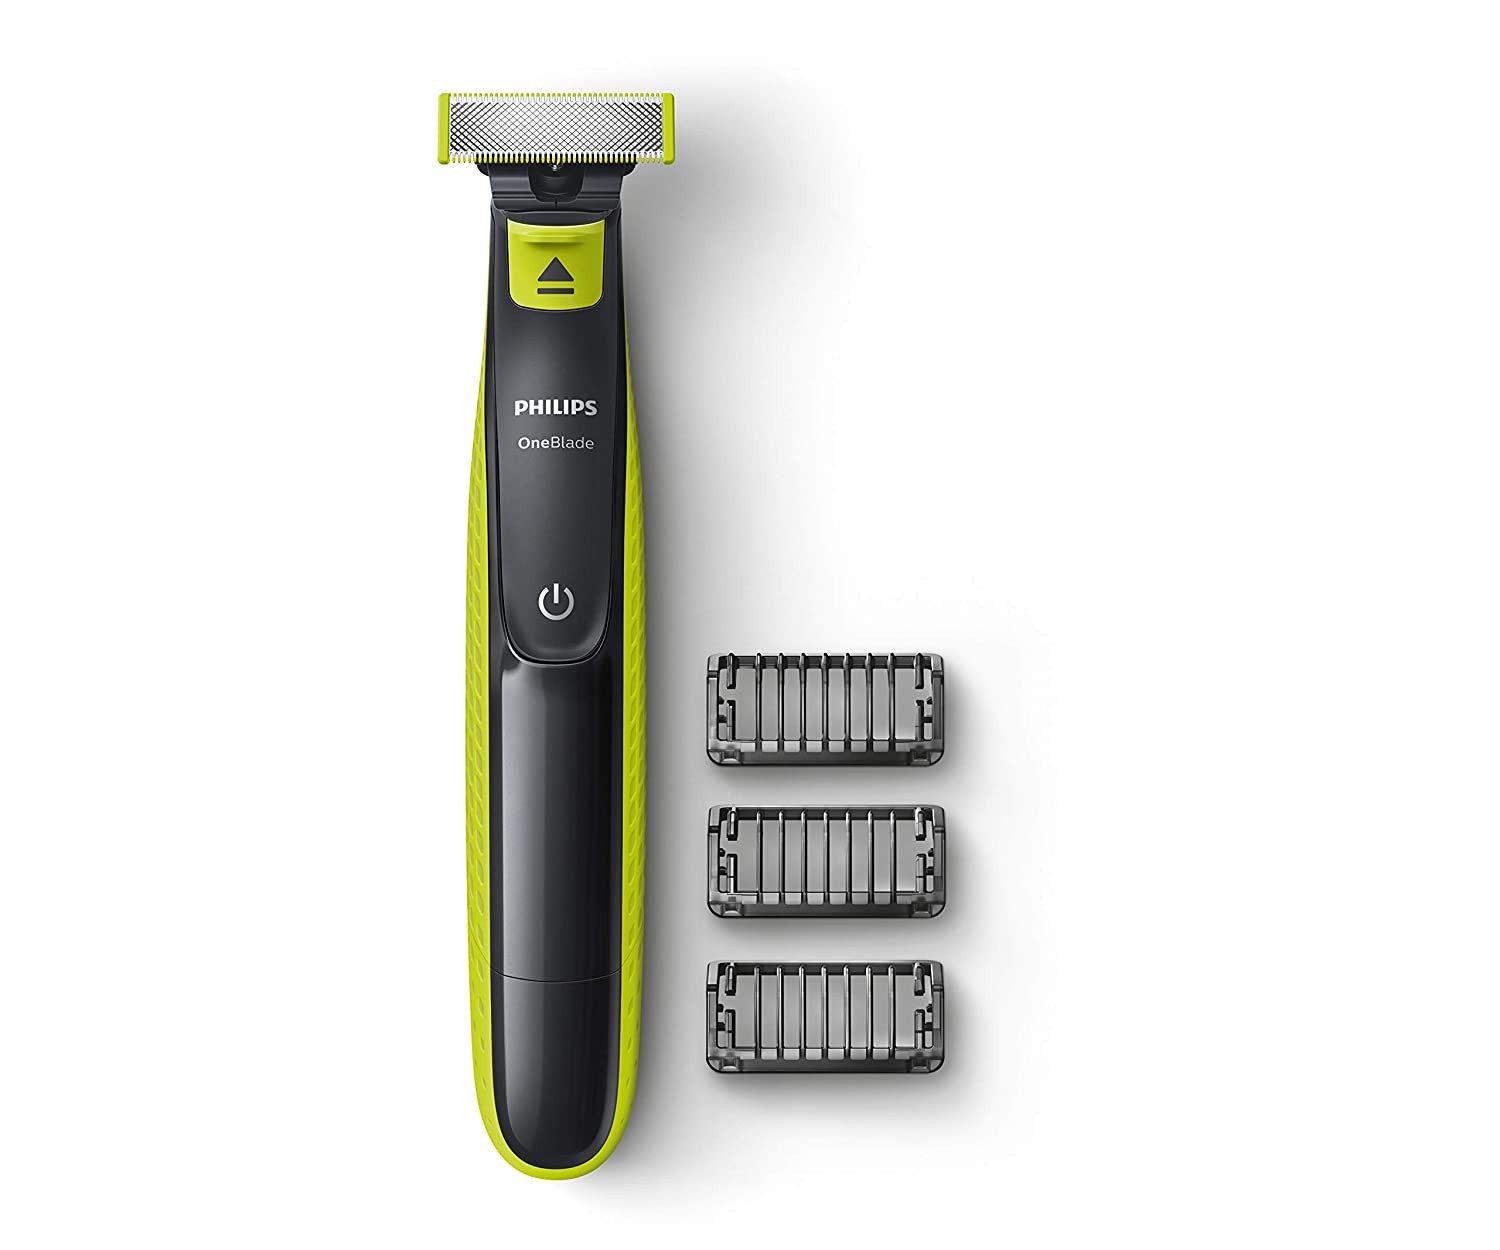 Philips QP2525/10 Cordless OneBlade Hybrid Trimmer and Shaver with 3 Trimming Combs